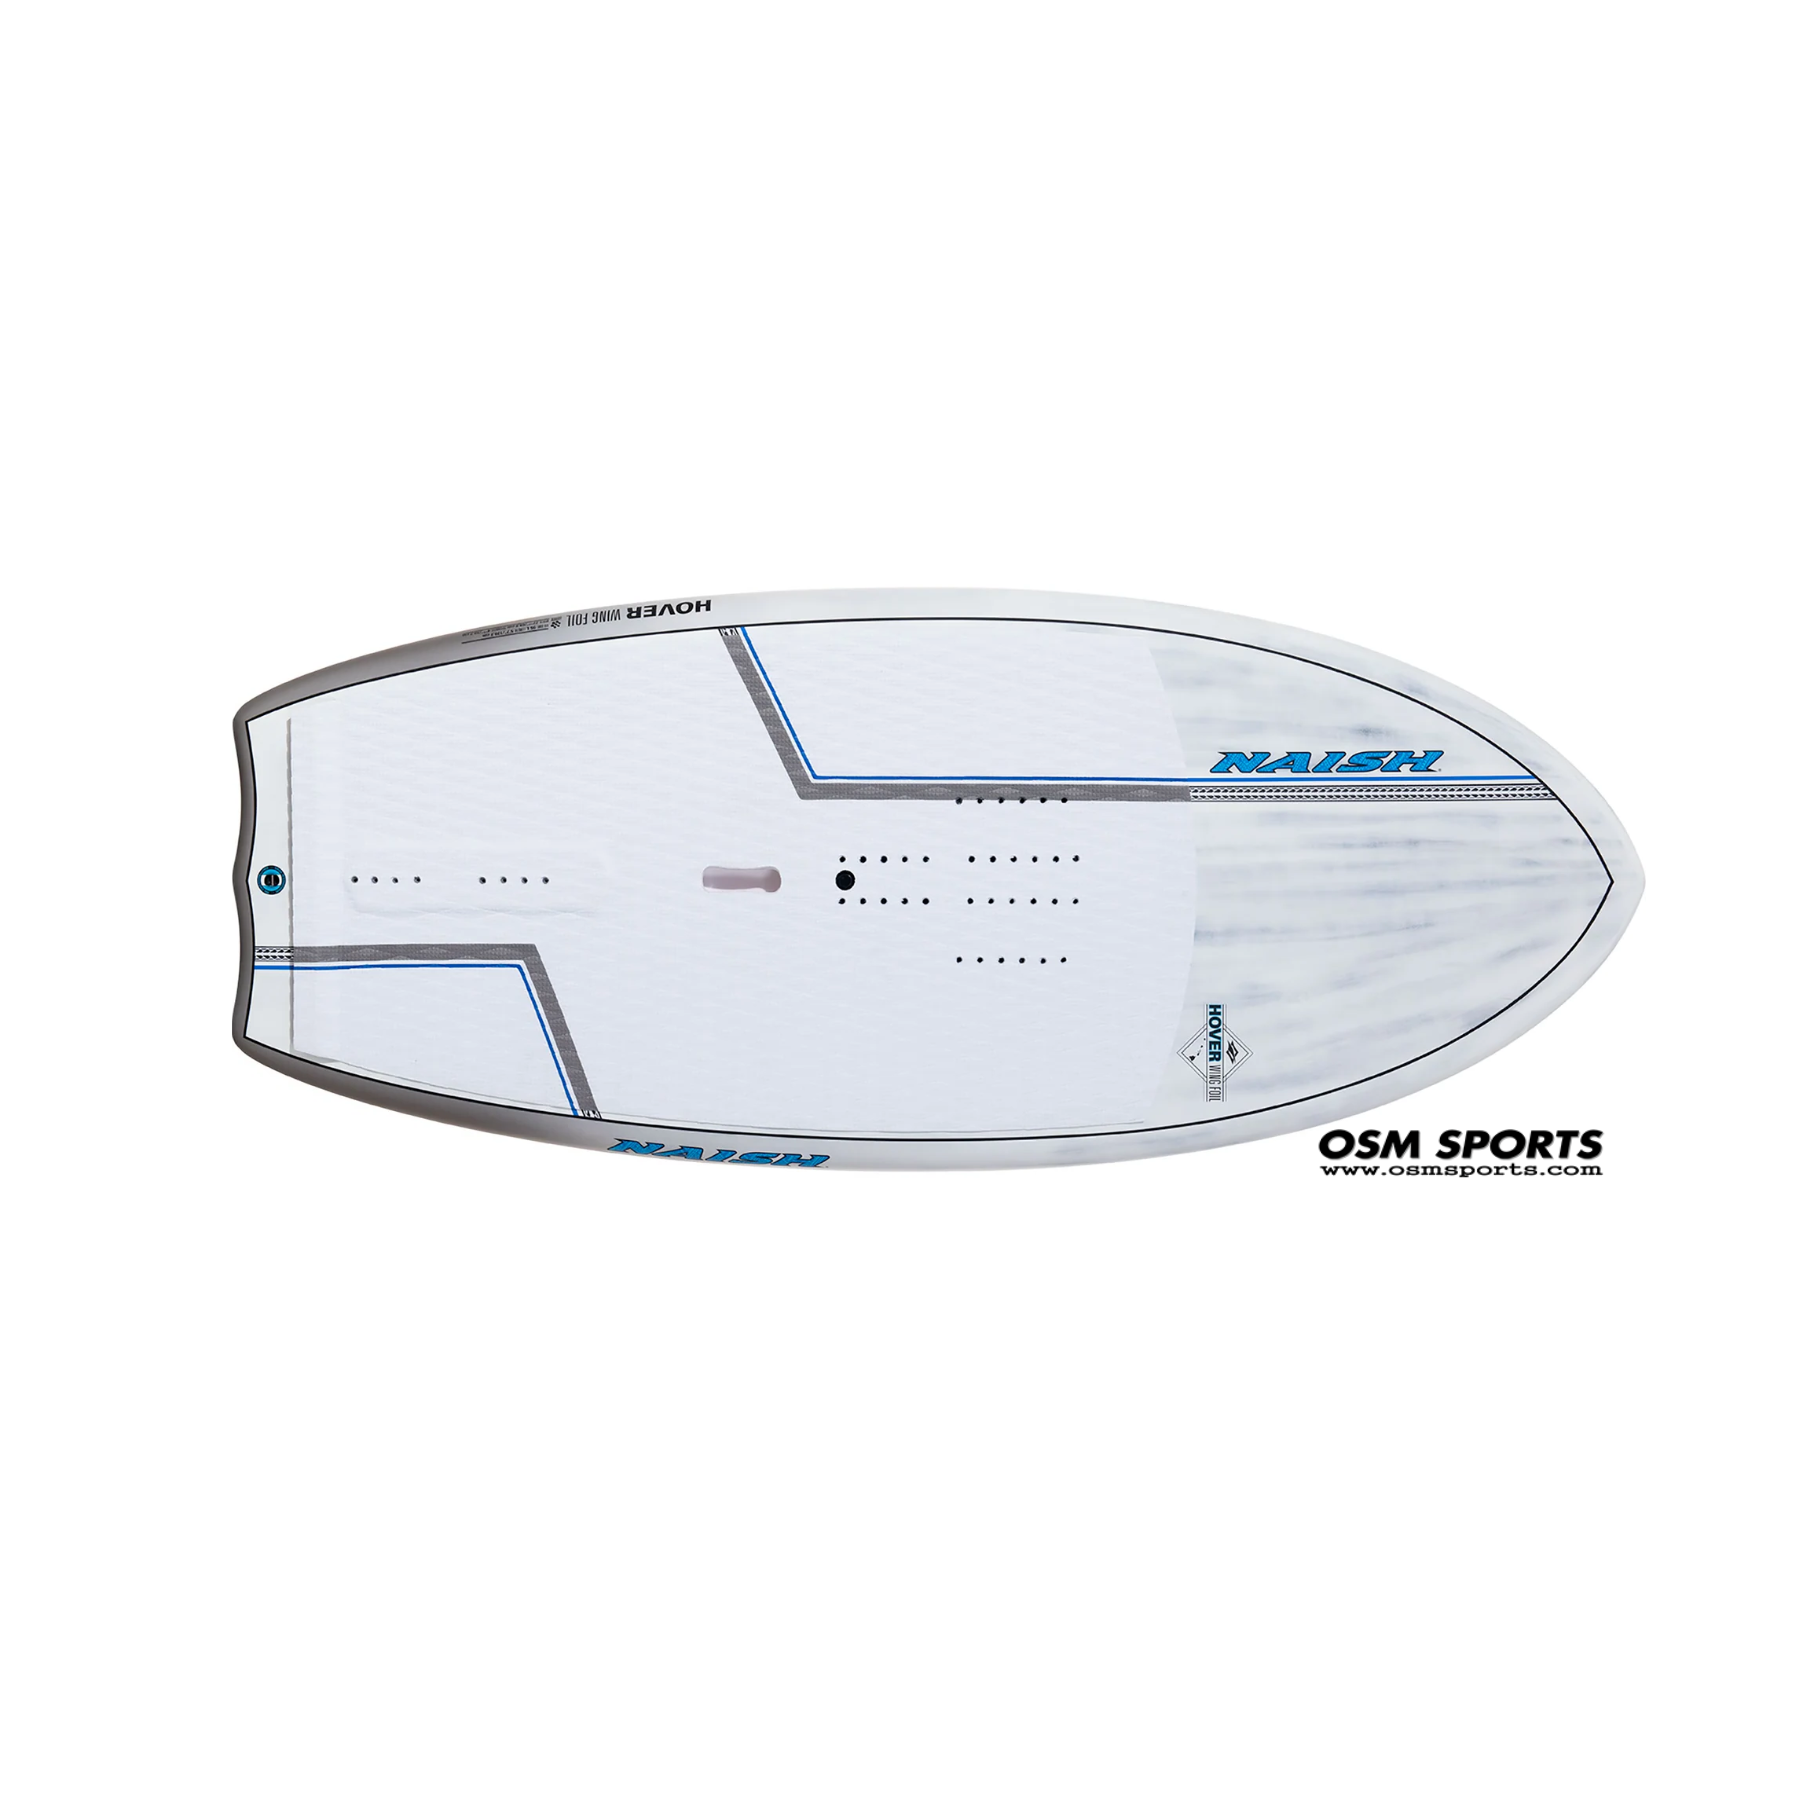 s26-naish-sup-board-hover-wing-foil-carbon-ultra-cu-95-deck_1800x1800.png